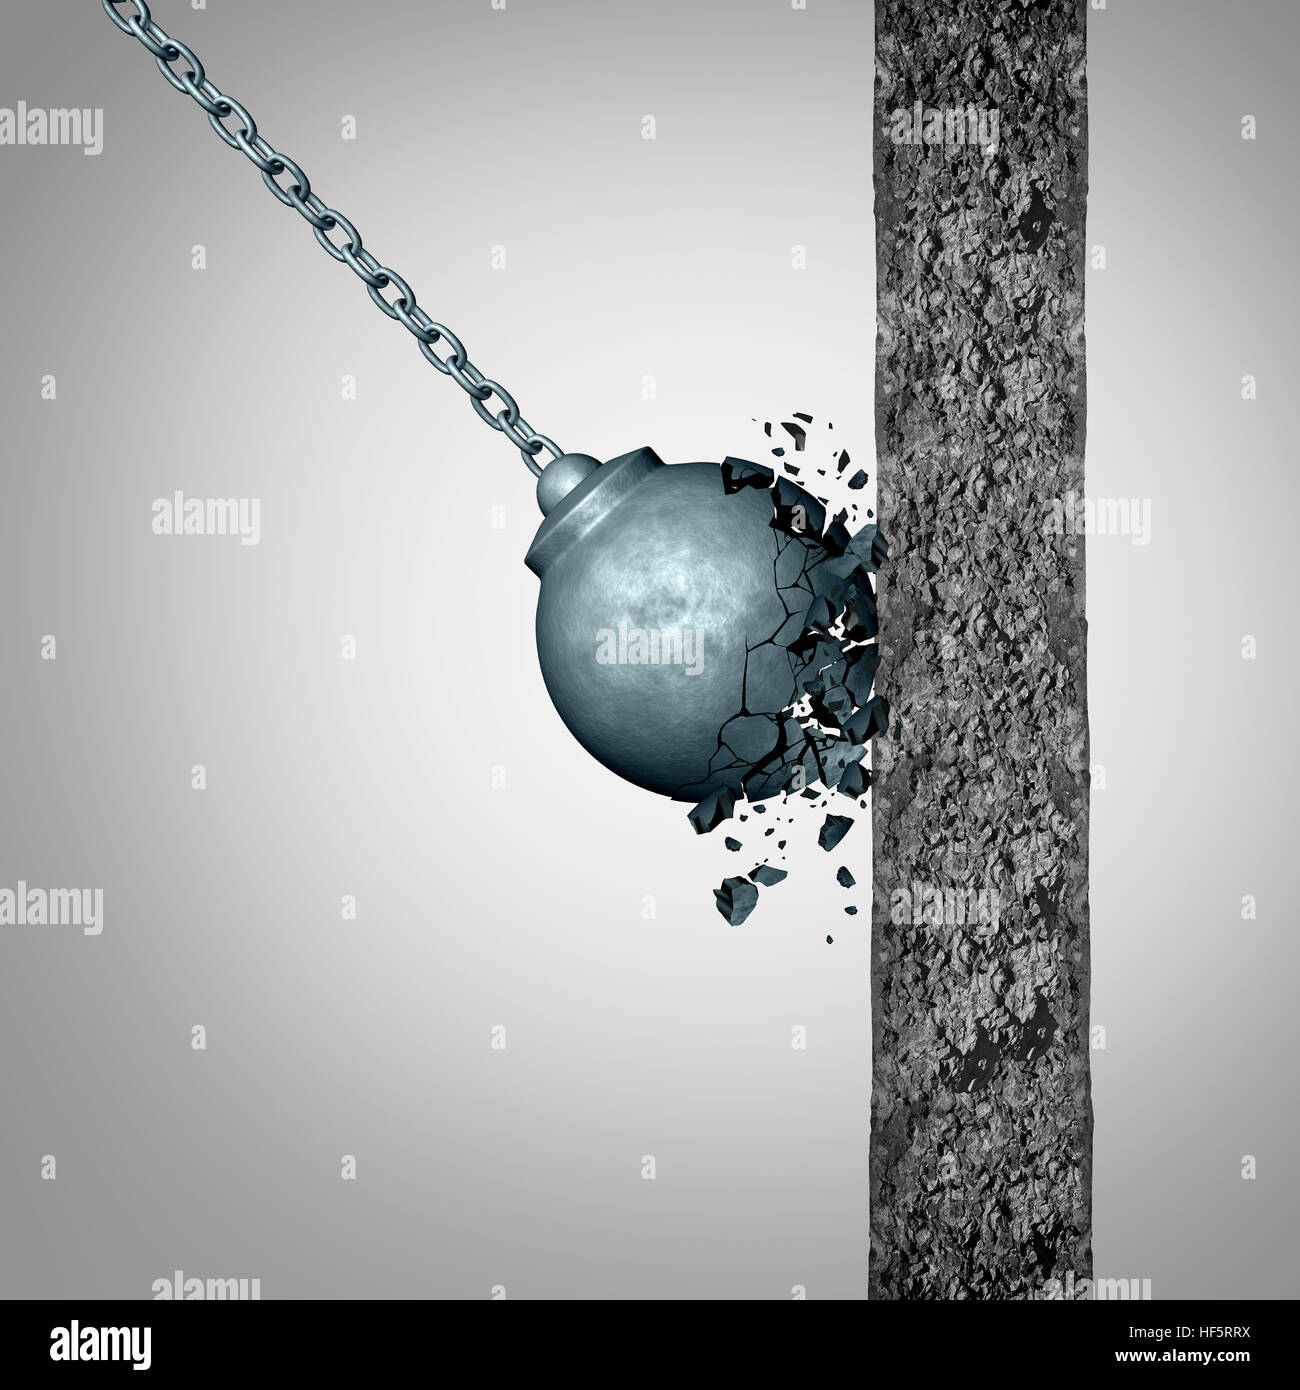 Concept of fragility and strength and resistance as a failing wrecking ball breaking apart after hitting a solid cement wall as a fragile metaphor wit Stock Photo